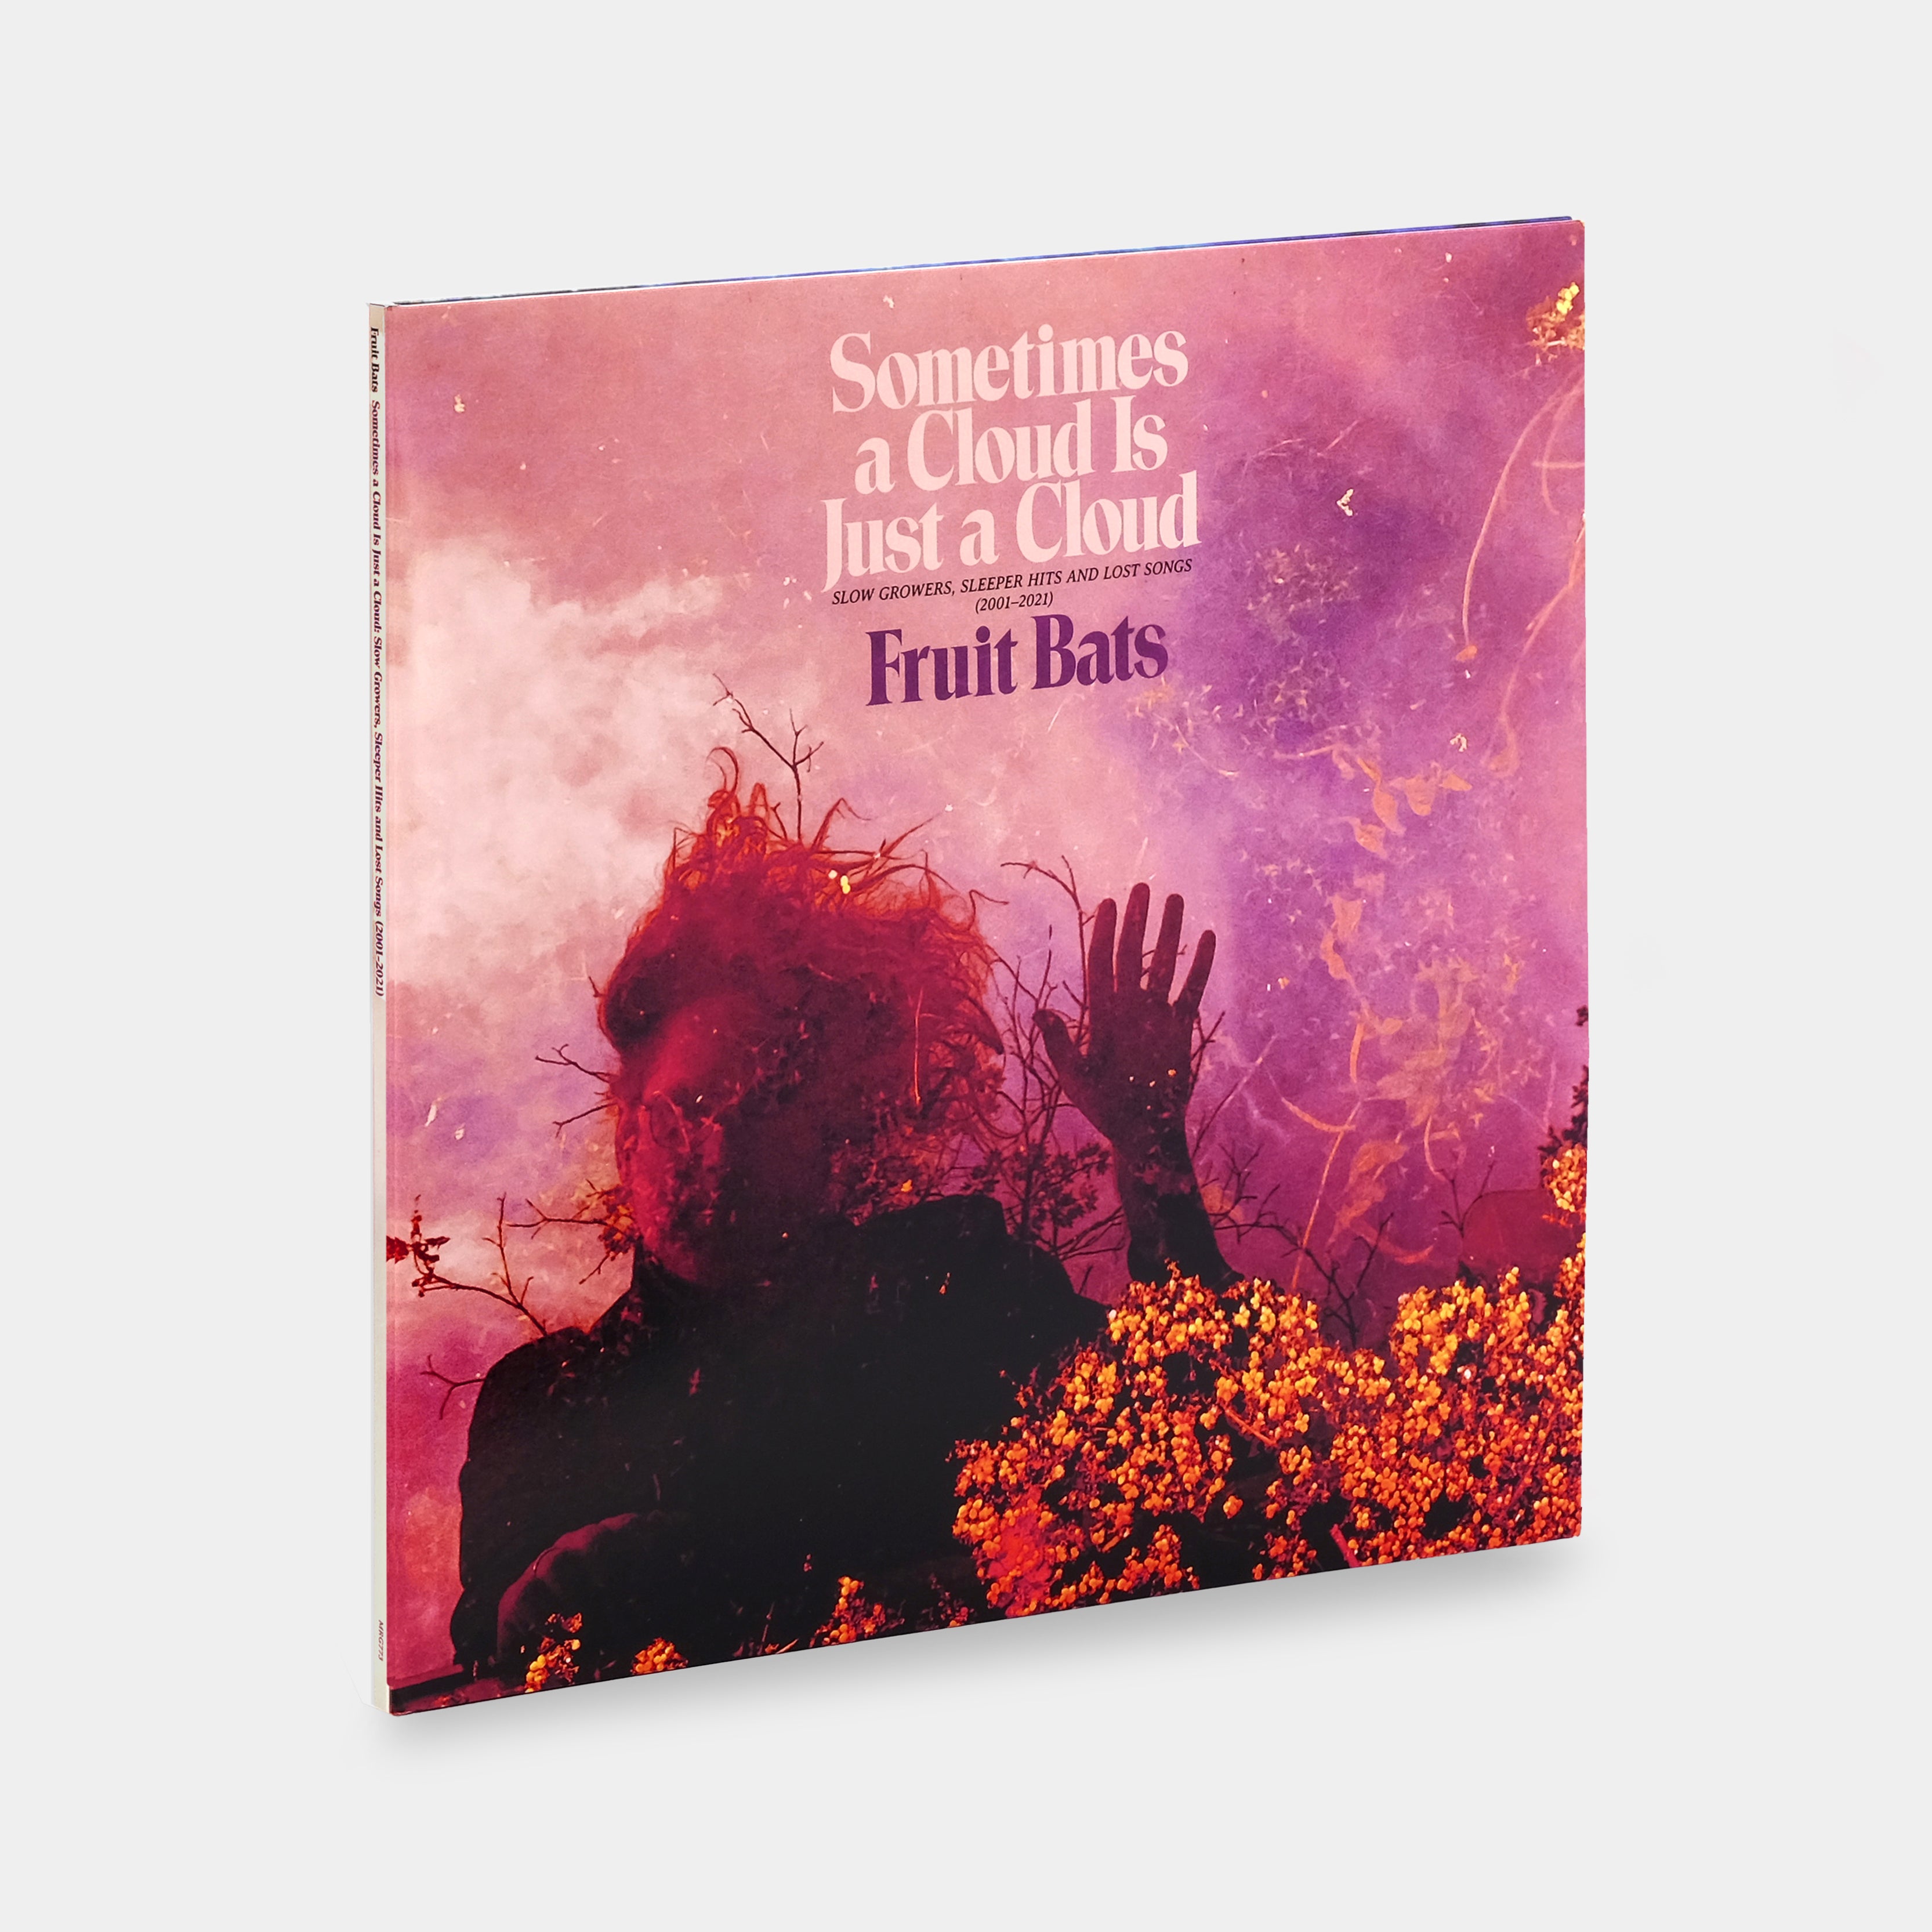 Fruit Bats - Sometimes a Cloud Is Just a Cloud: Slow Growers, Sleeper Hits, and Lost Songs (2001-2021) 2xLP Pink & Violet Swirl Vinyl Record